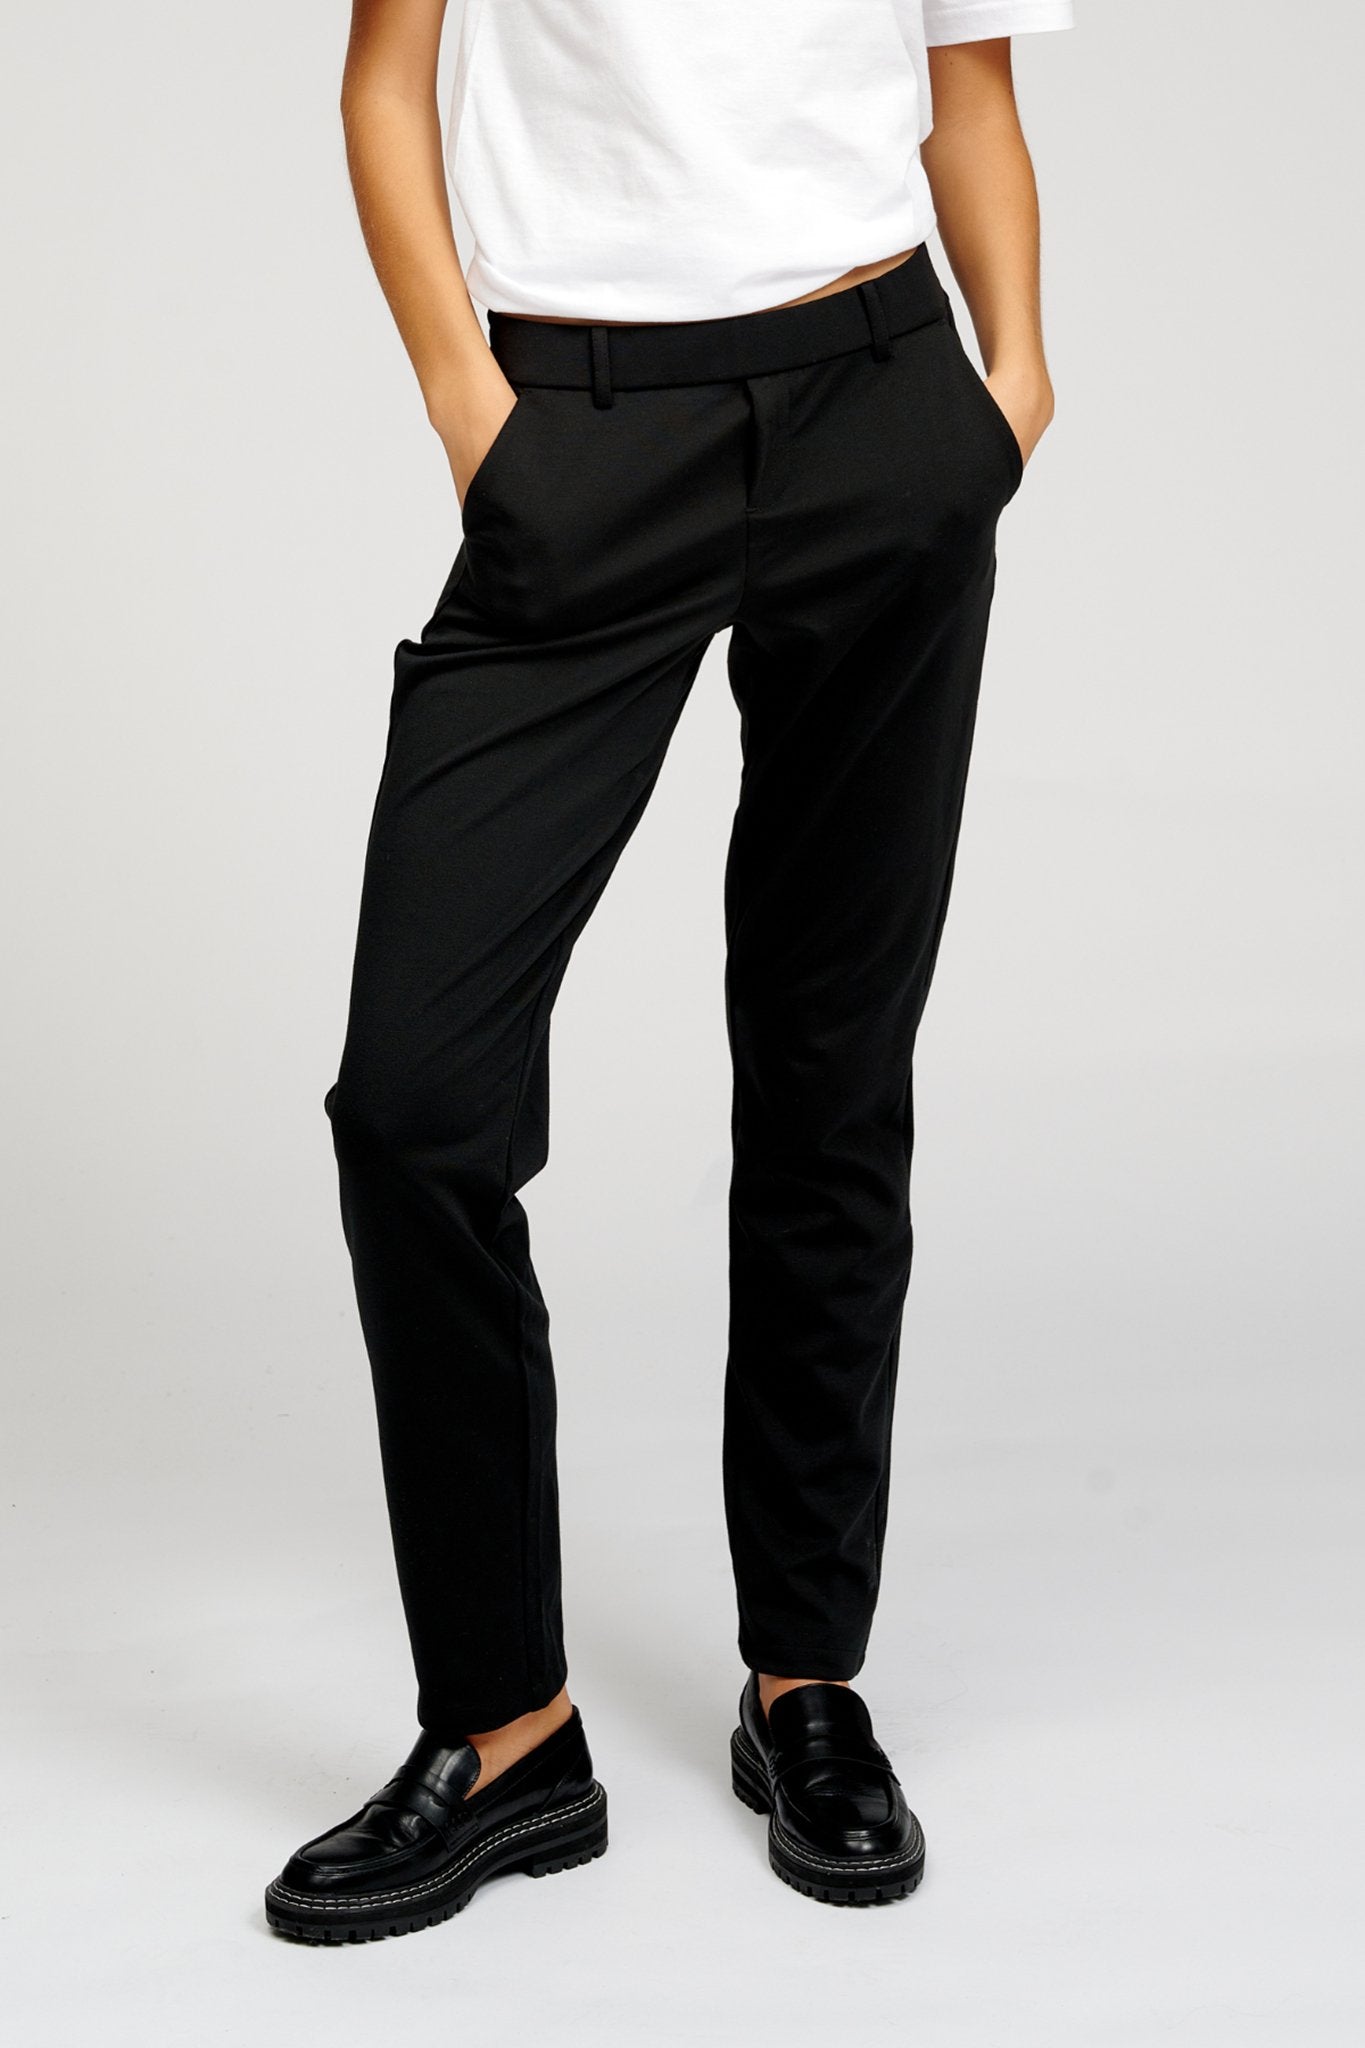 Casual Chic with high-waisted pants